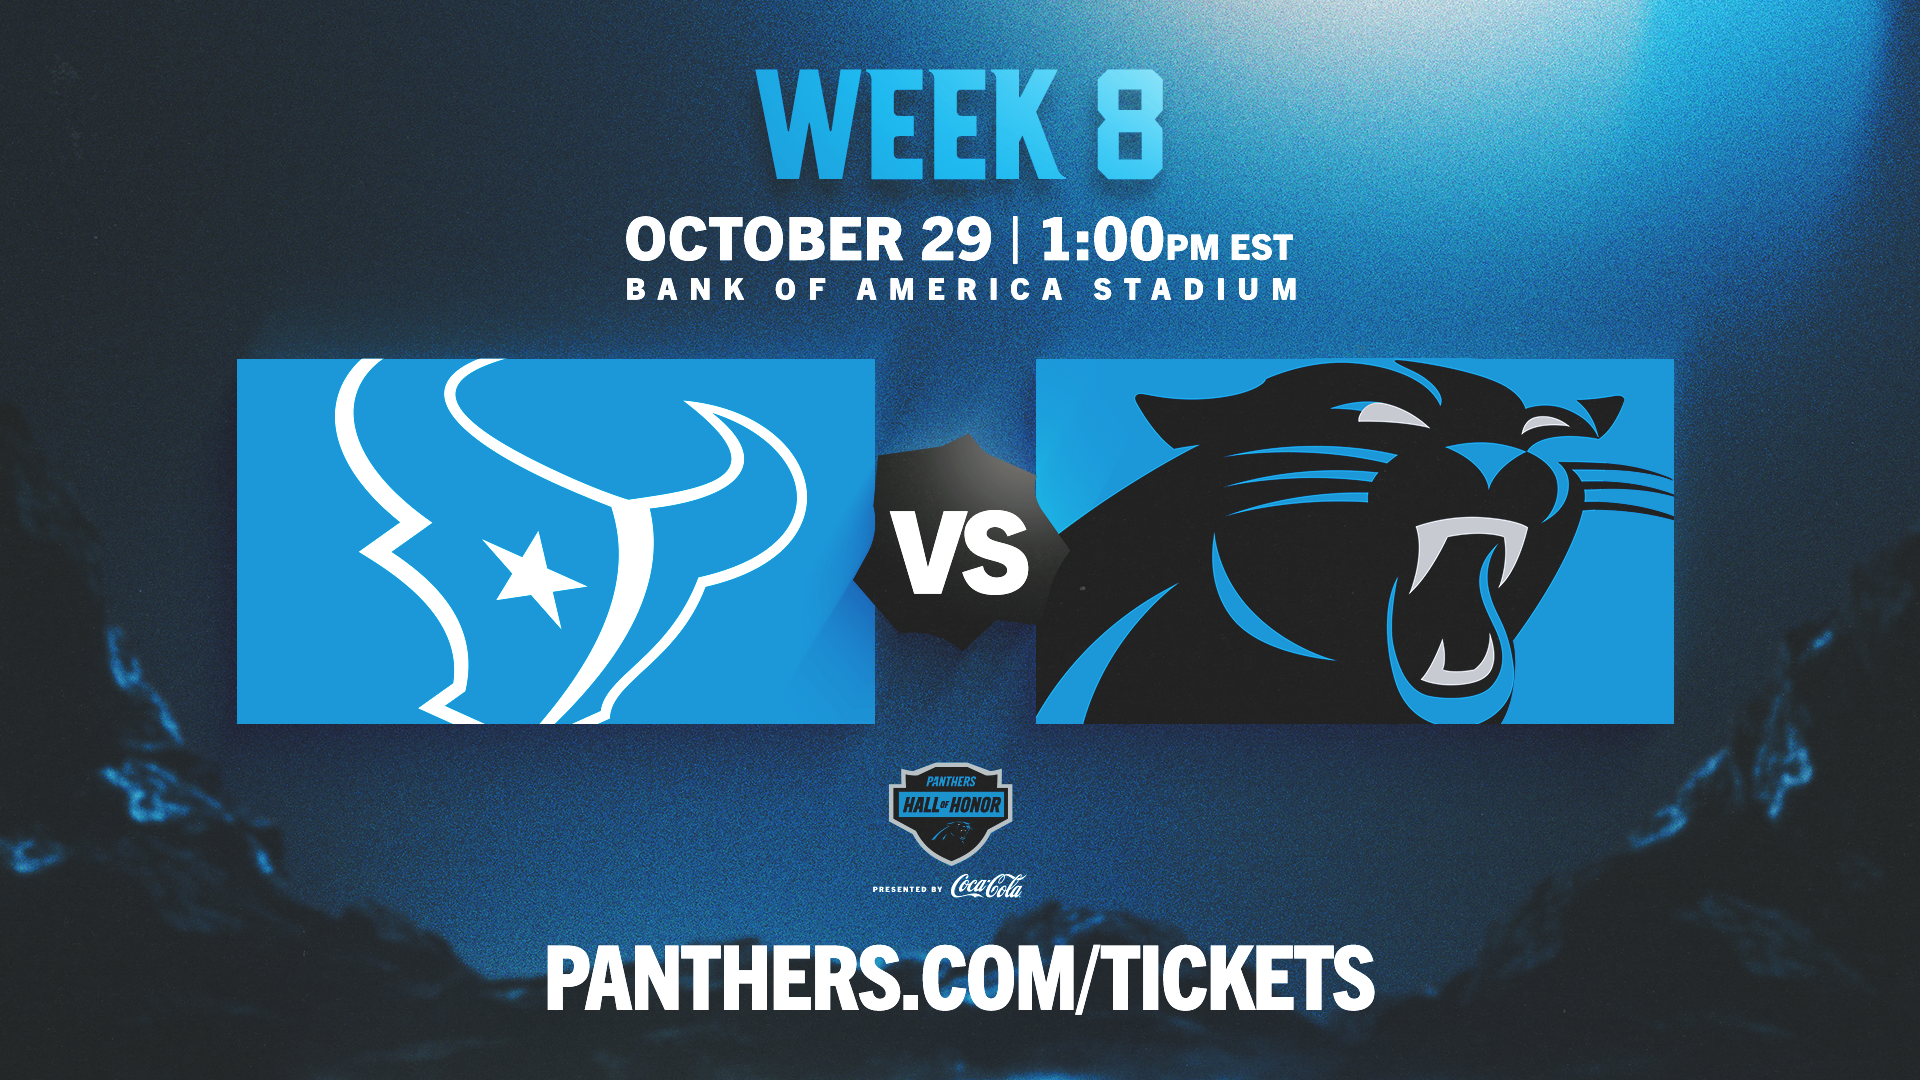 next home panthers game